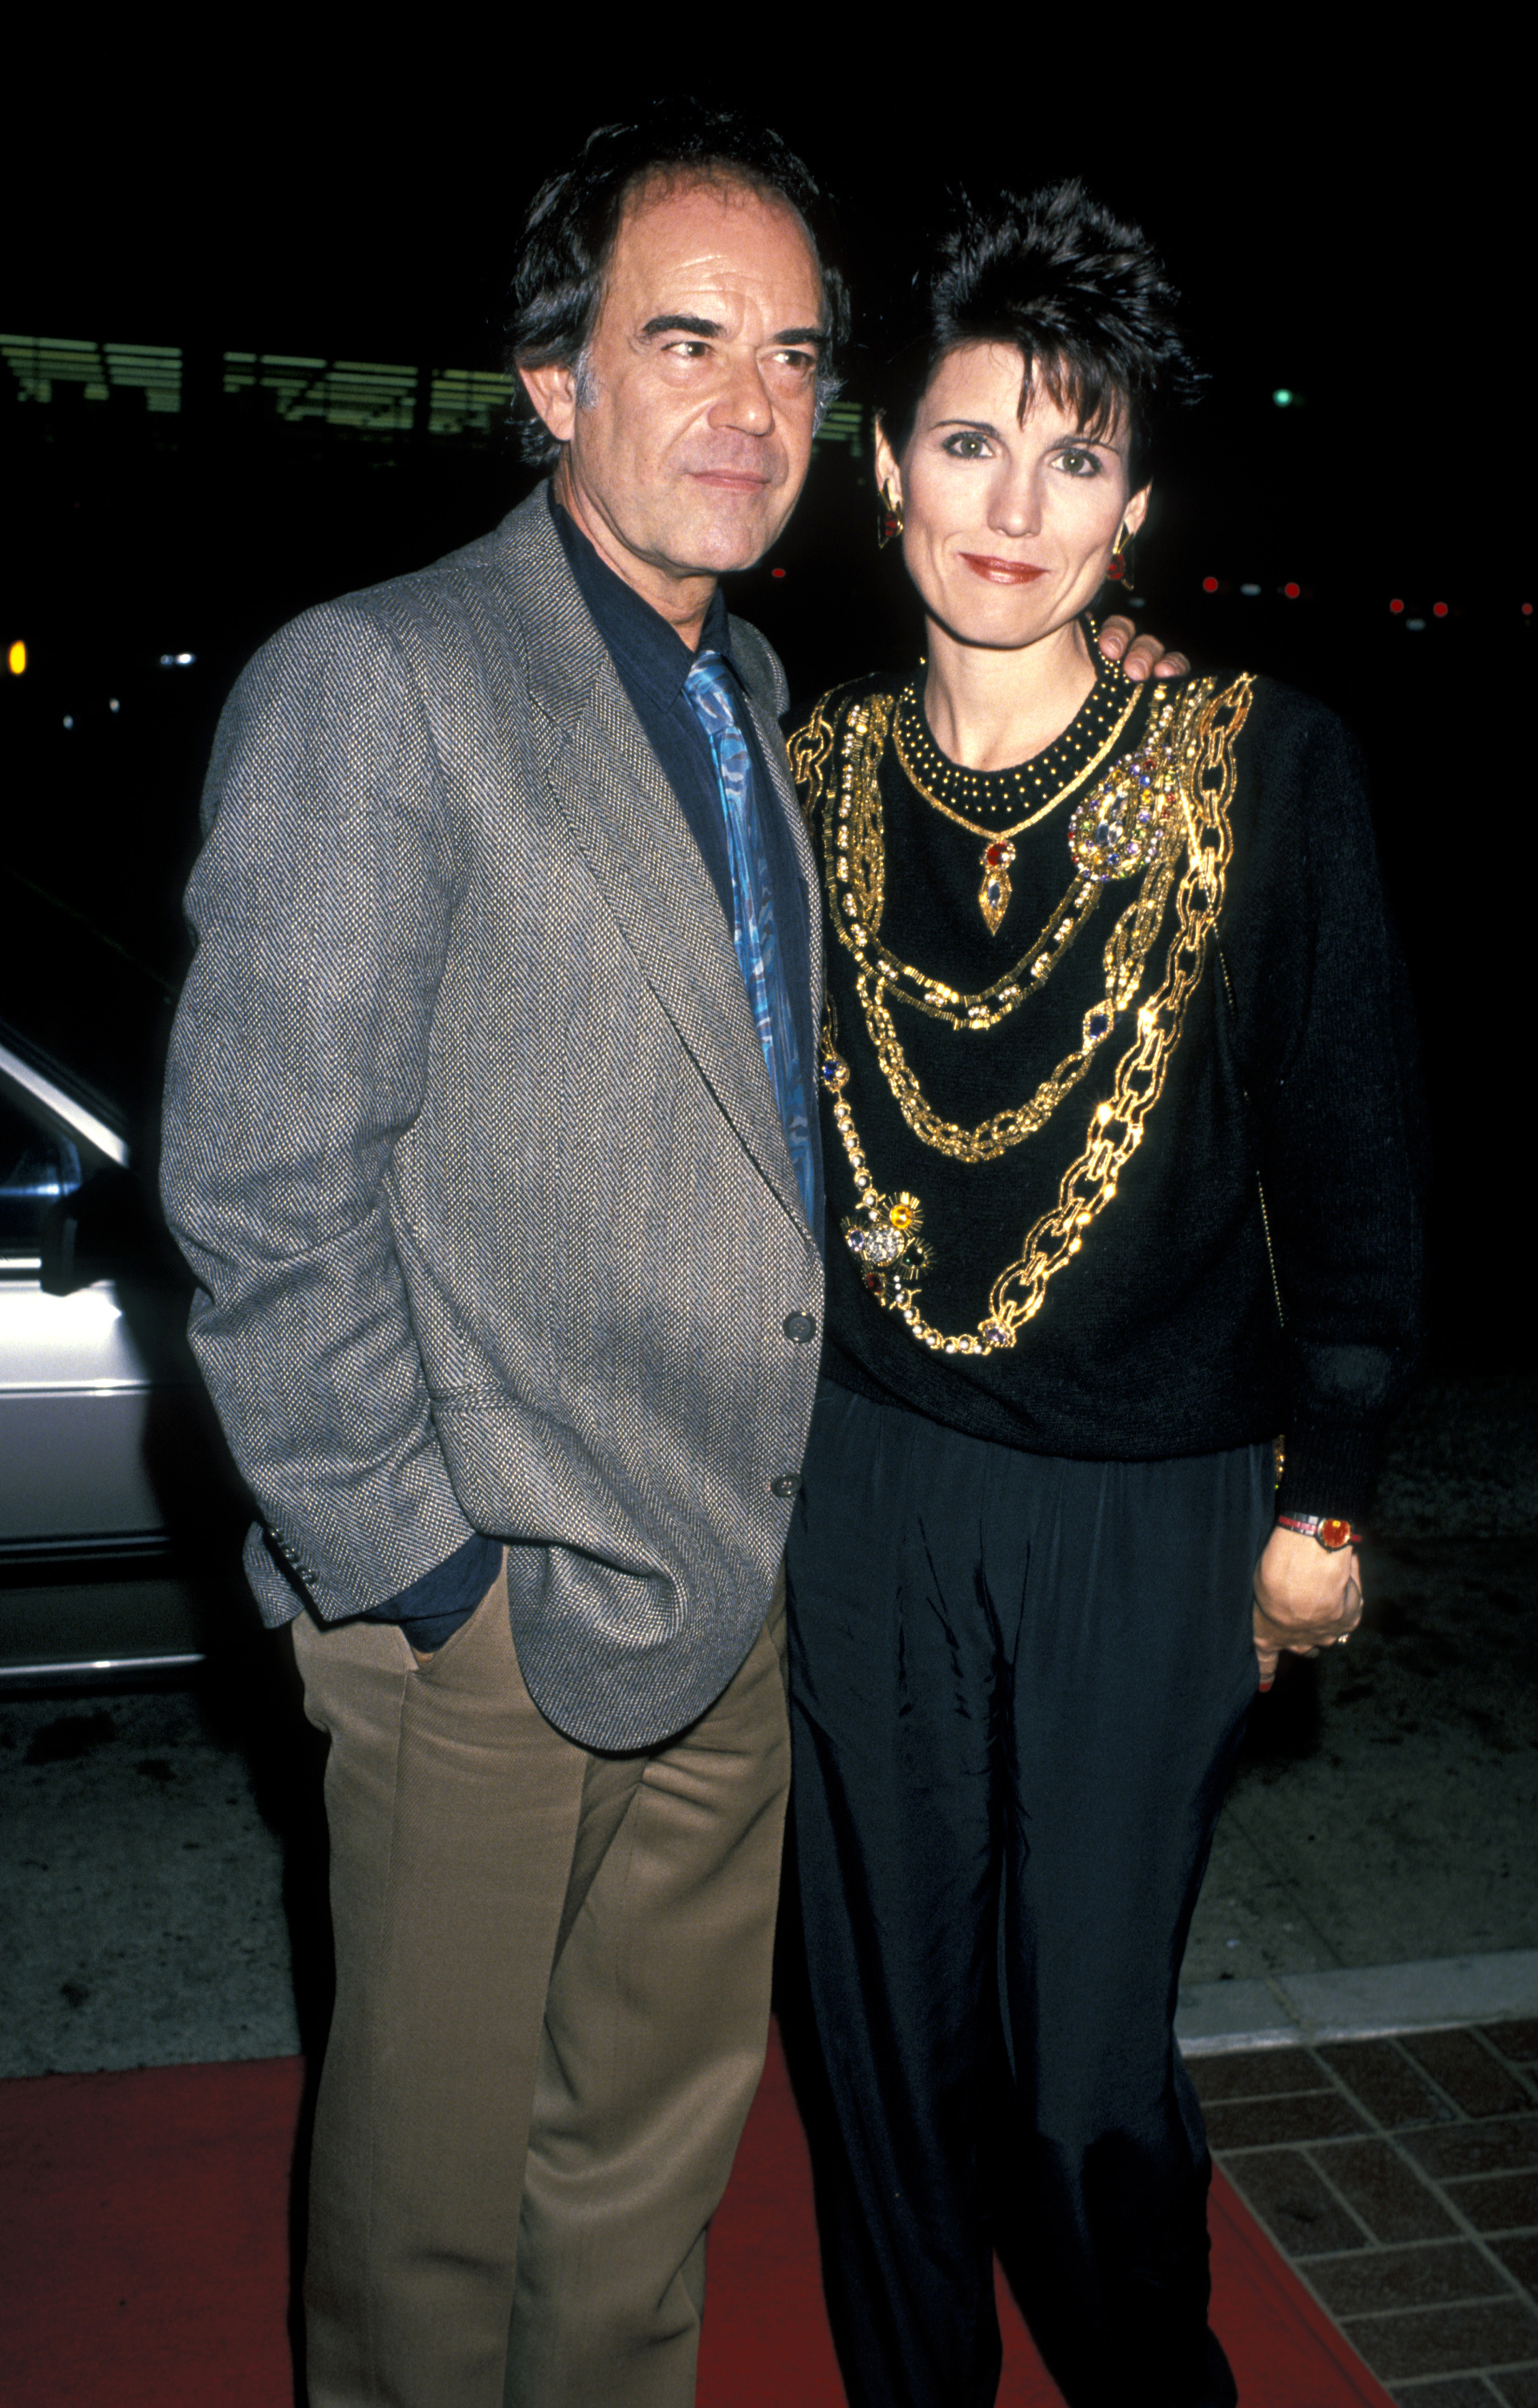 Laurence Luckinbill and Lucie Arnaz during opening night of "Durante" after party at Shubert Theater & Chasen's Restaurant in Beverly Hills. | Source: Getty Images